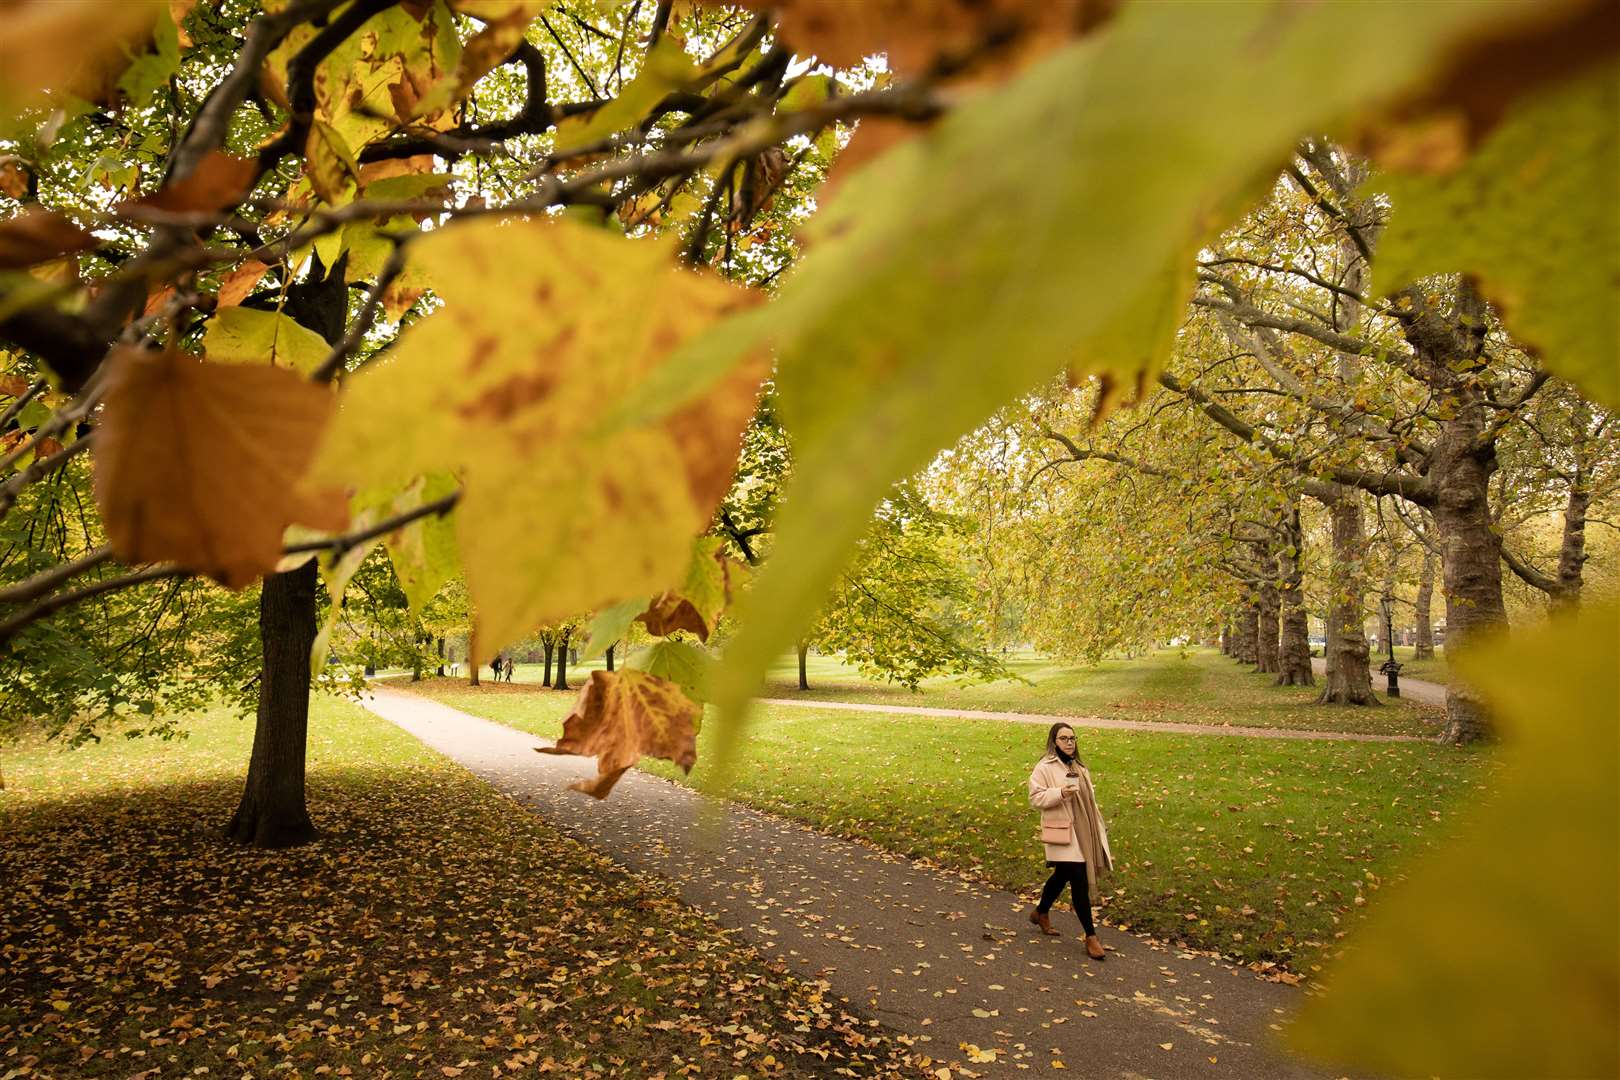 People walk among trees displaying autumn foliage in St James Park, in central London (Aaron Chown/PA)